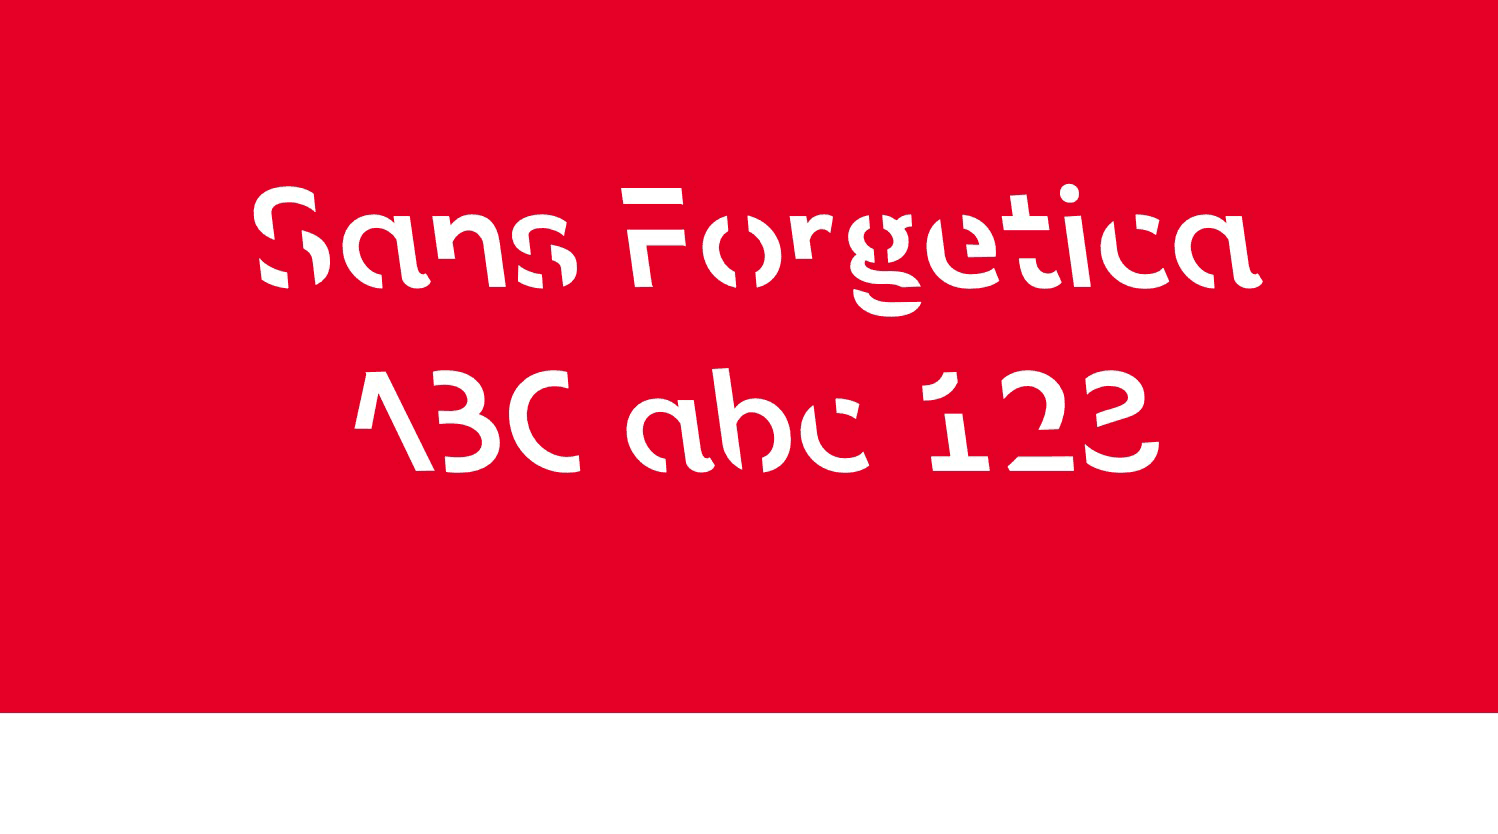 More information about "The Sans Forgetica font does not enhance memory, researchers report"